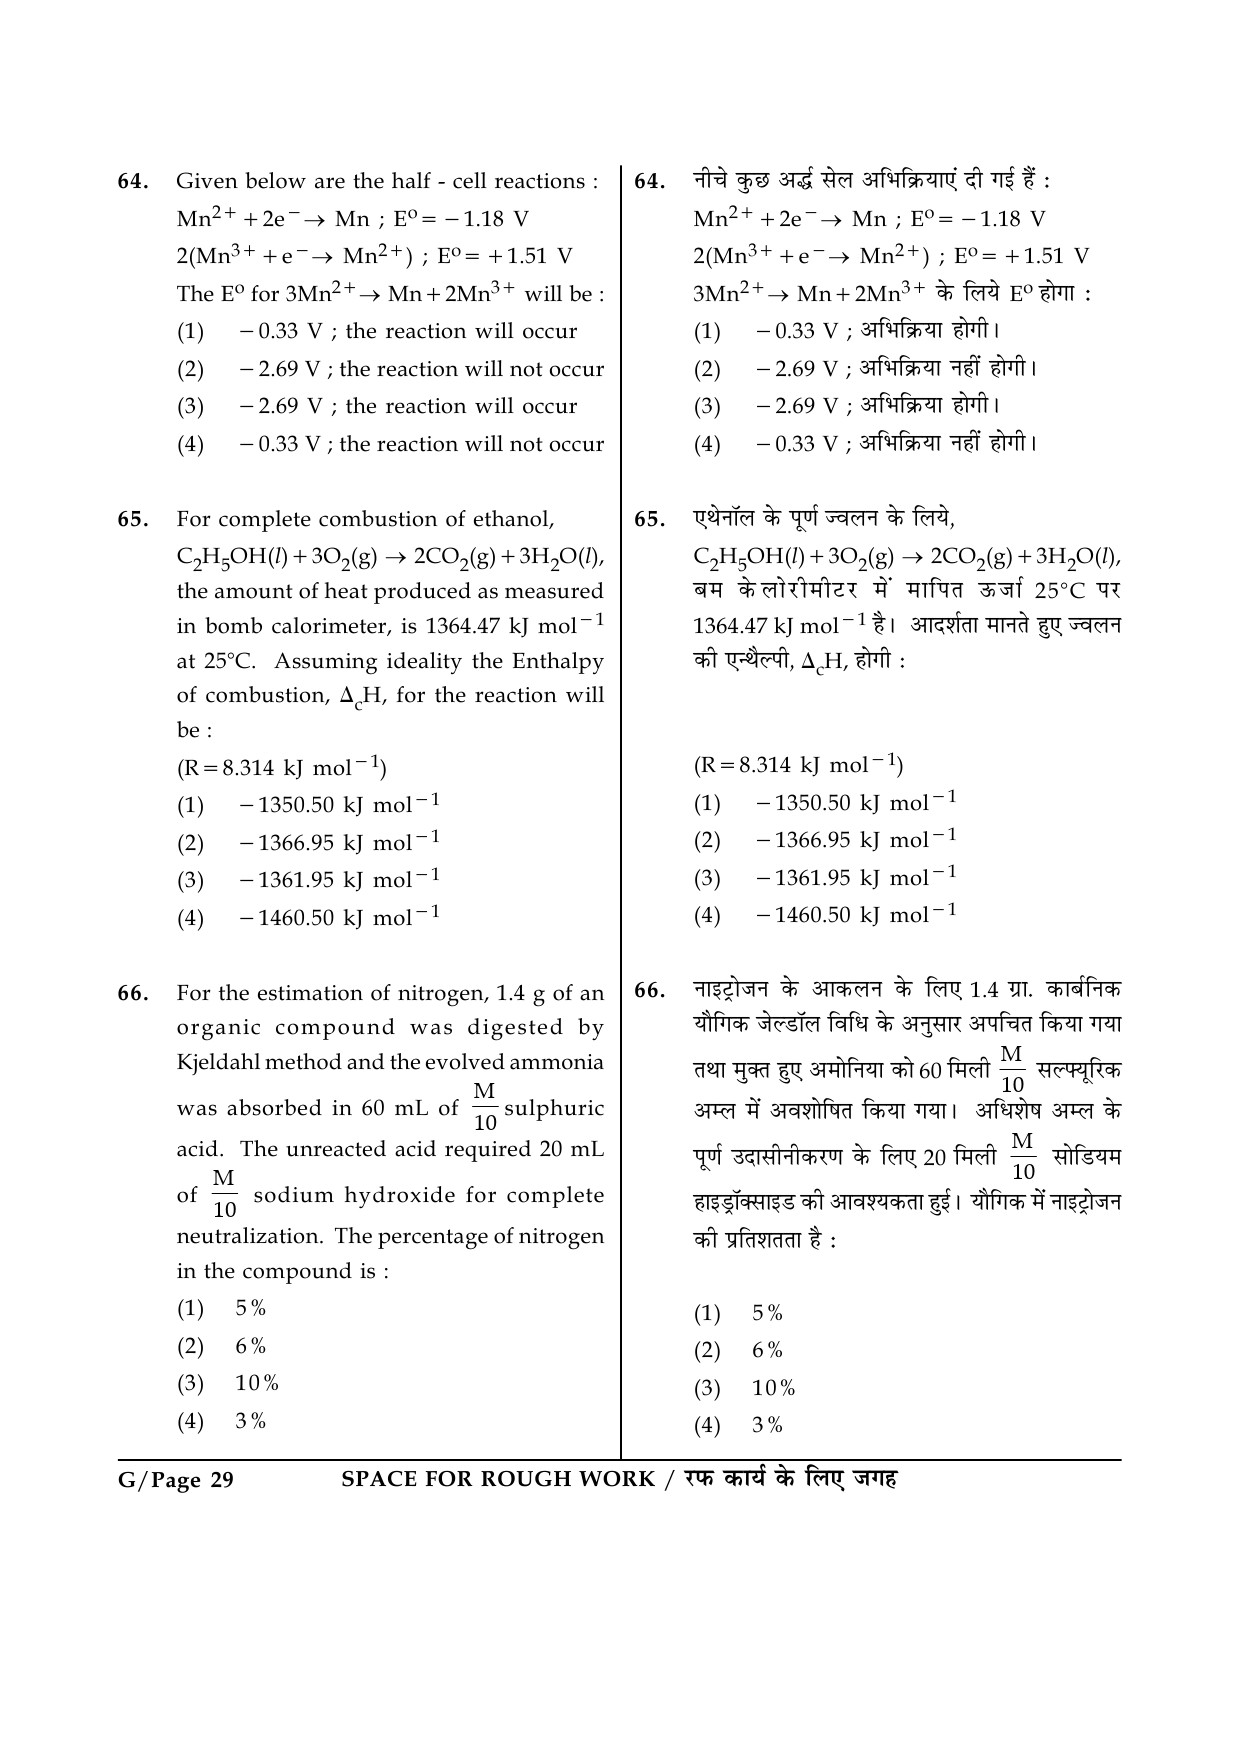 JEE Main Exam Question Paper 2014 Booklet G 29